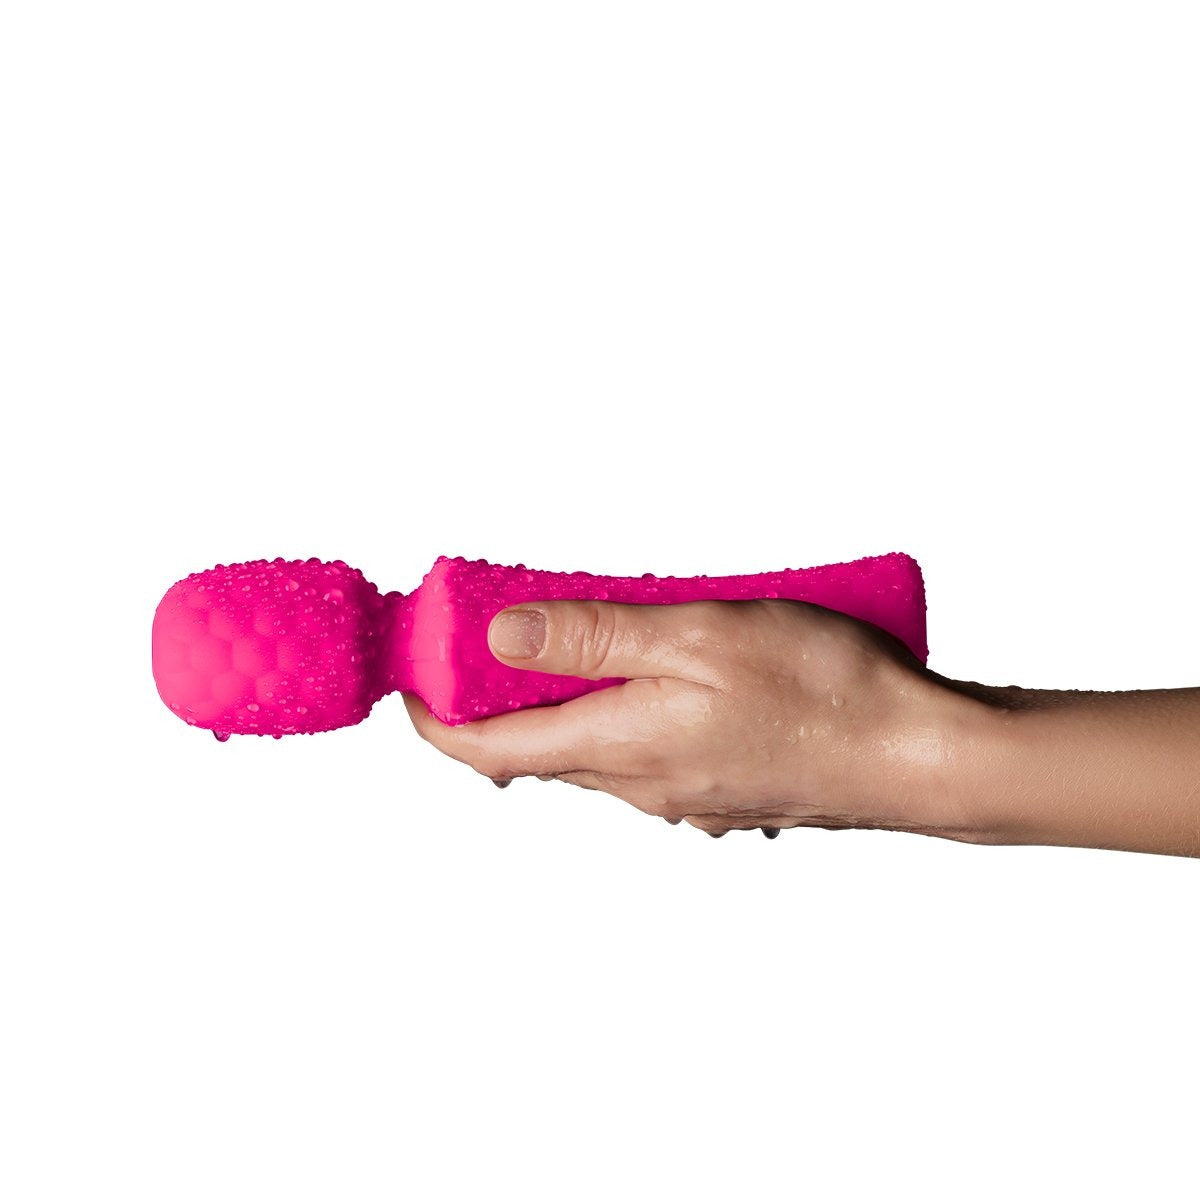 Femme Funn Ultra Wand - Buy At Luxury Toy X - Free 3-Day Shipping